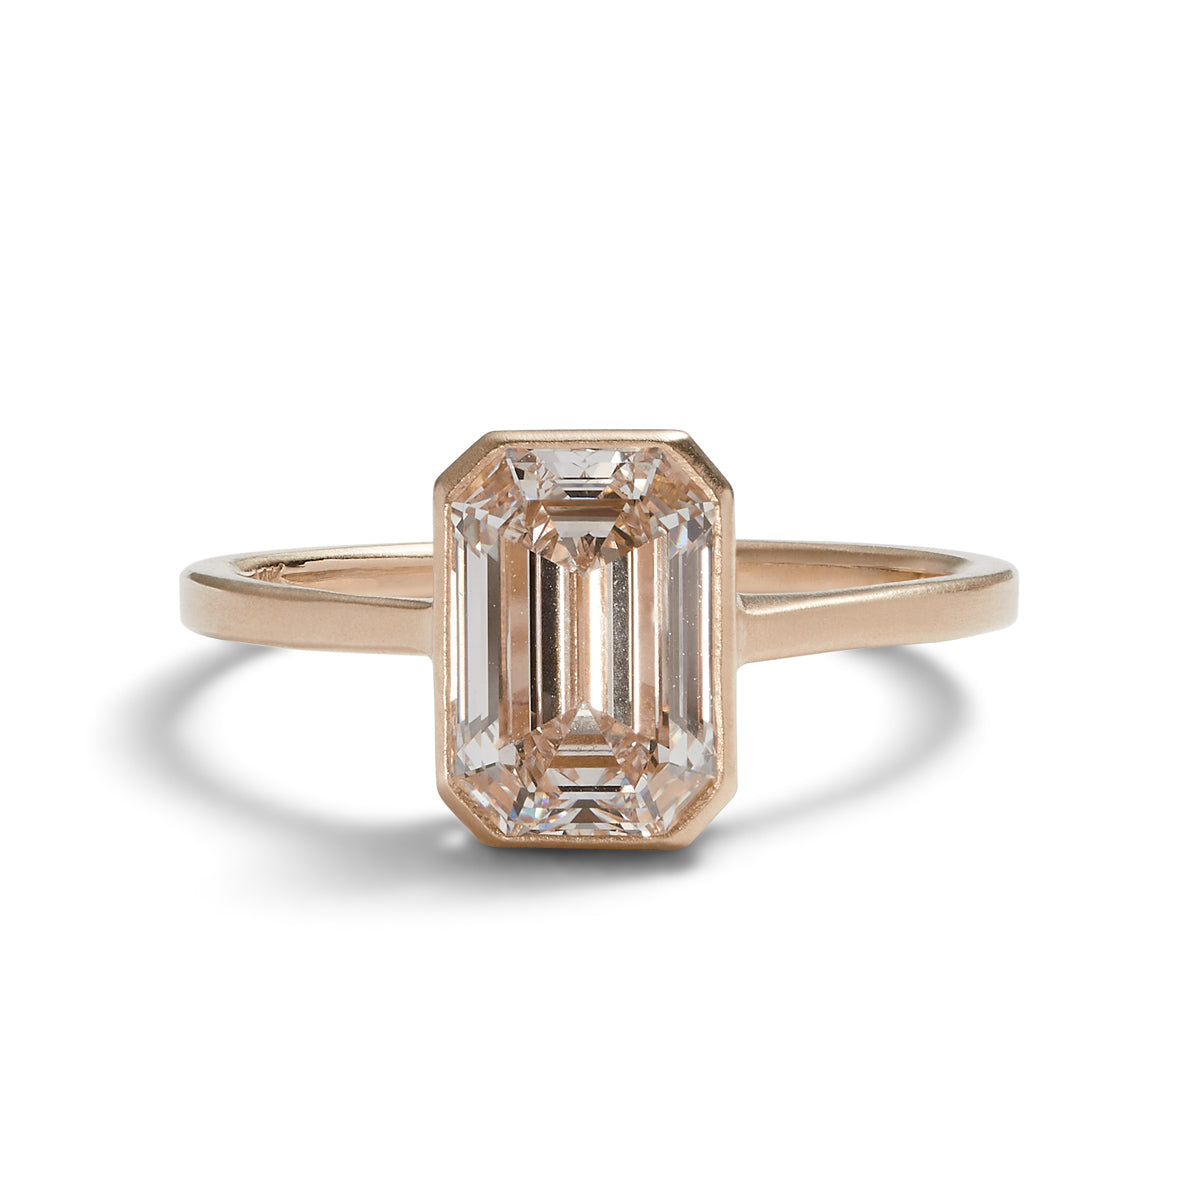 Emerald cut lab-grown diamond Honos ring (1.75 carat). Set in 14K recycled gold and made in Portland, Oregon.